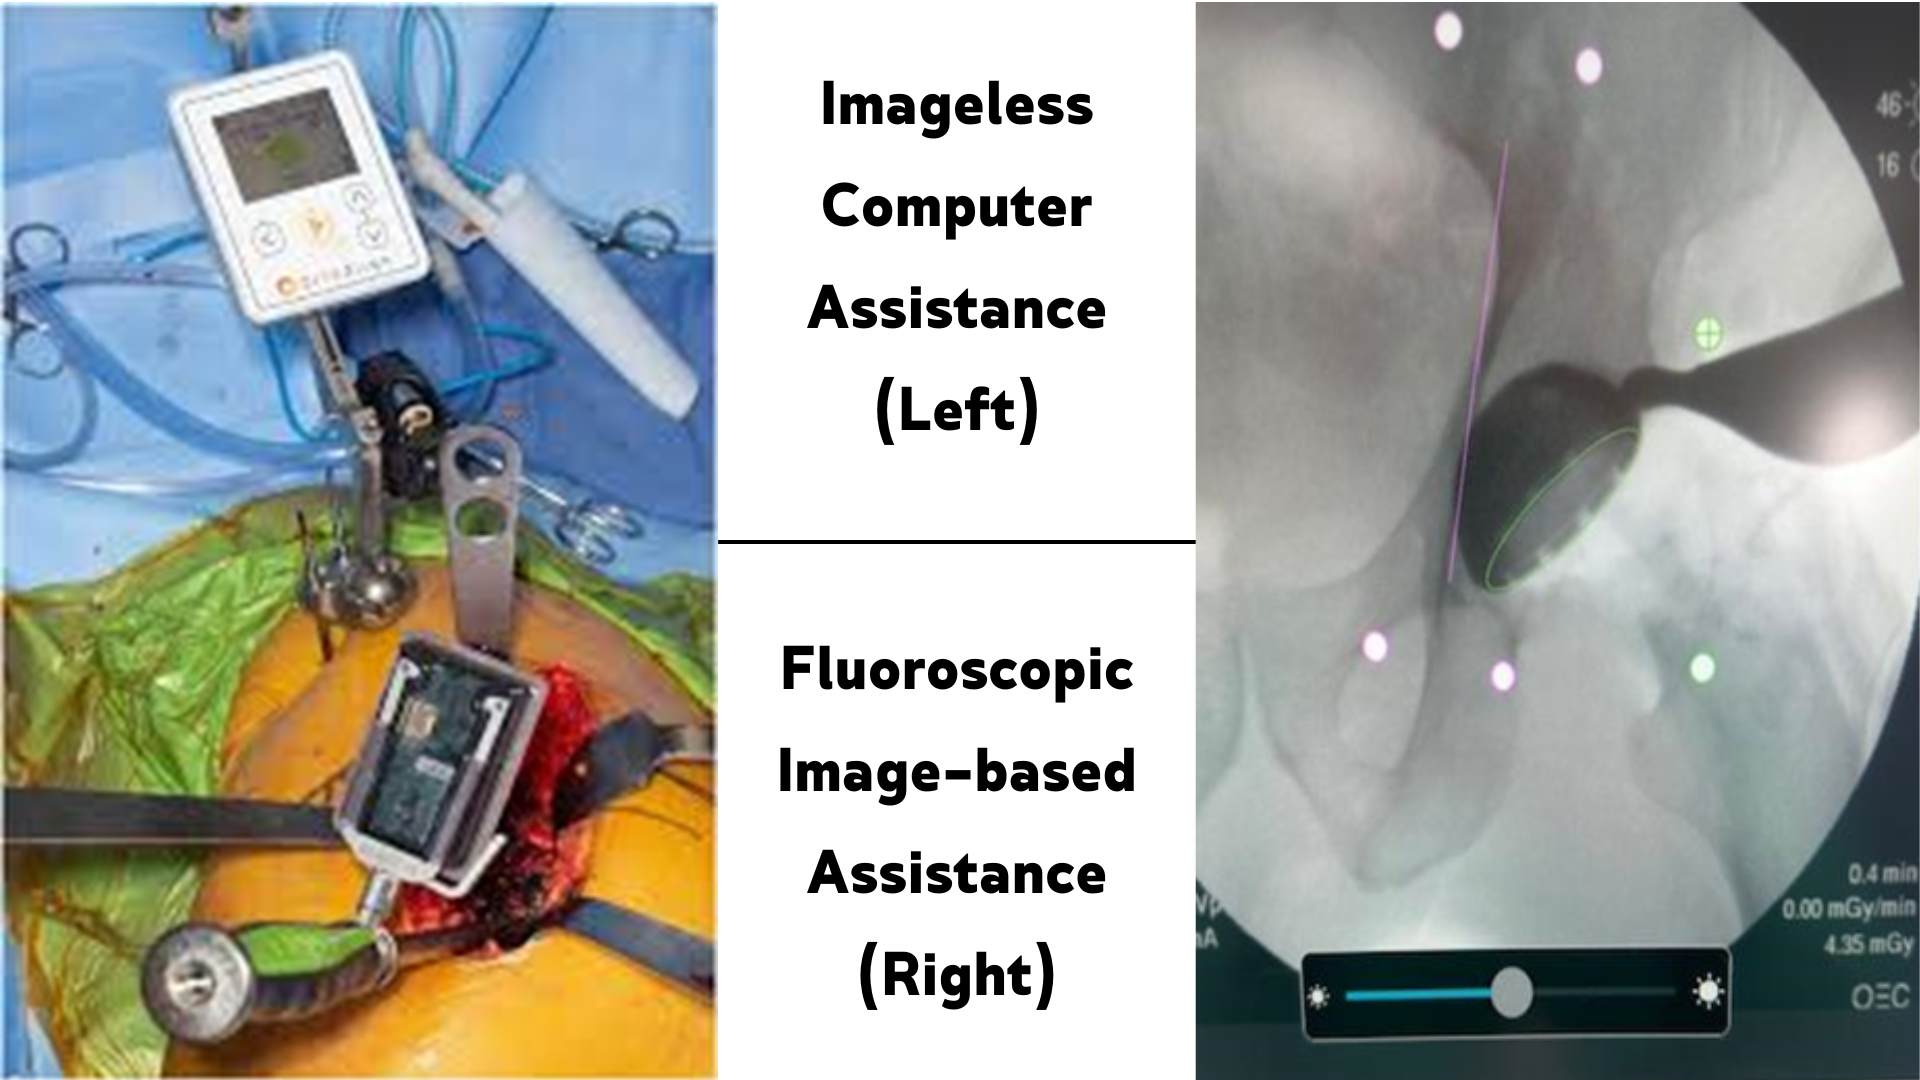 Imageless and Fluoroscopic Computer Assistance